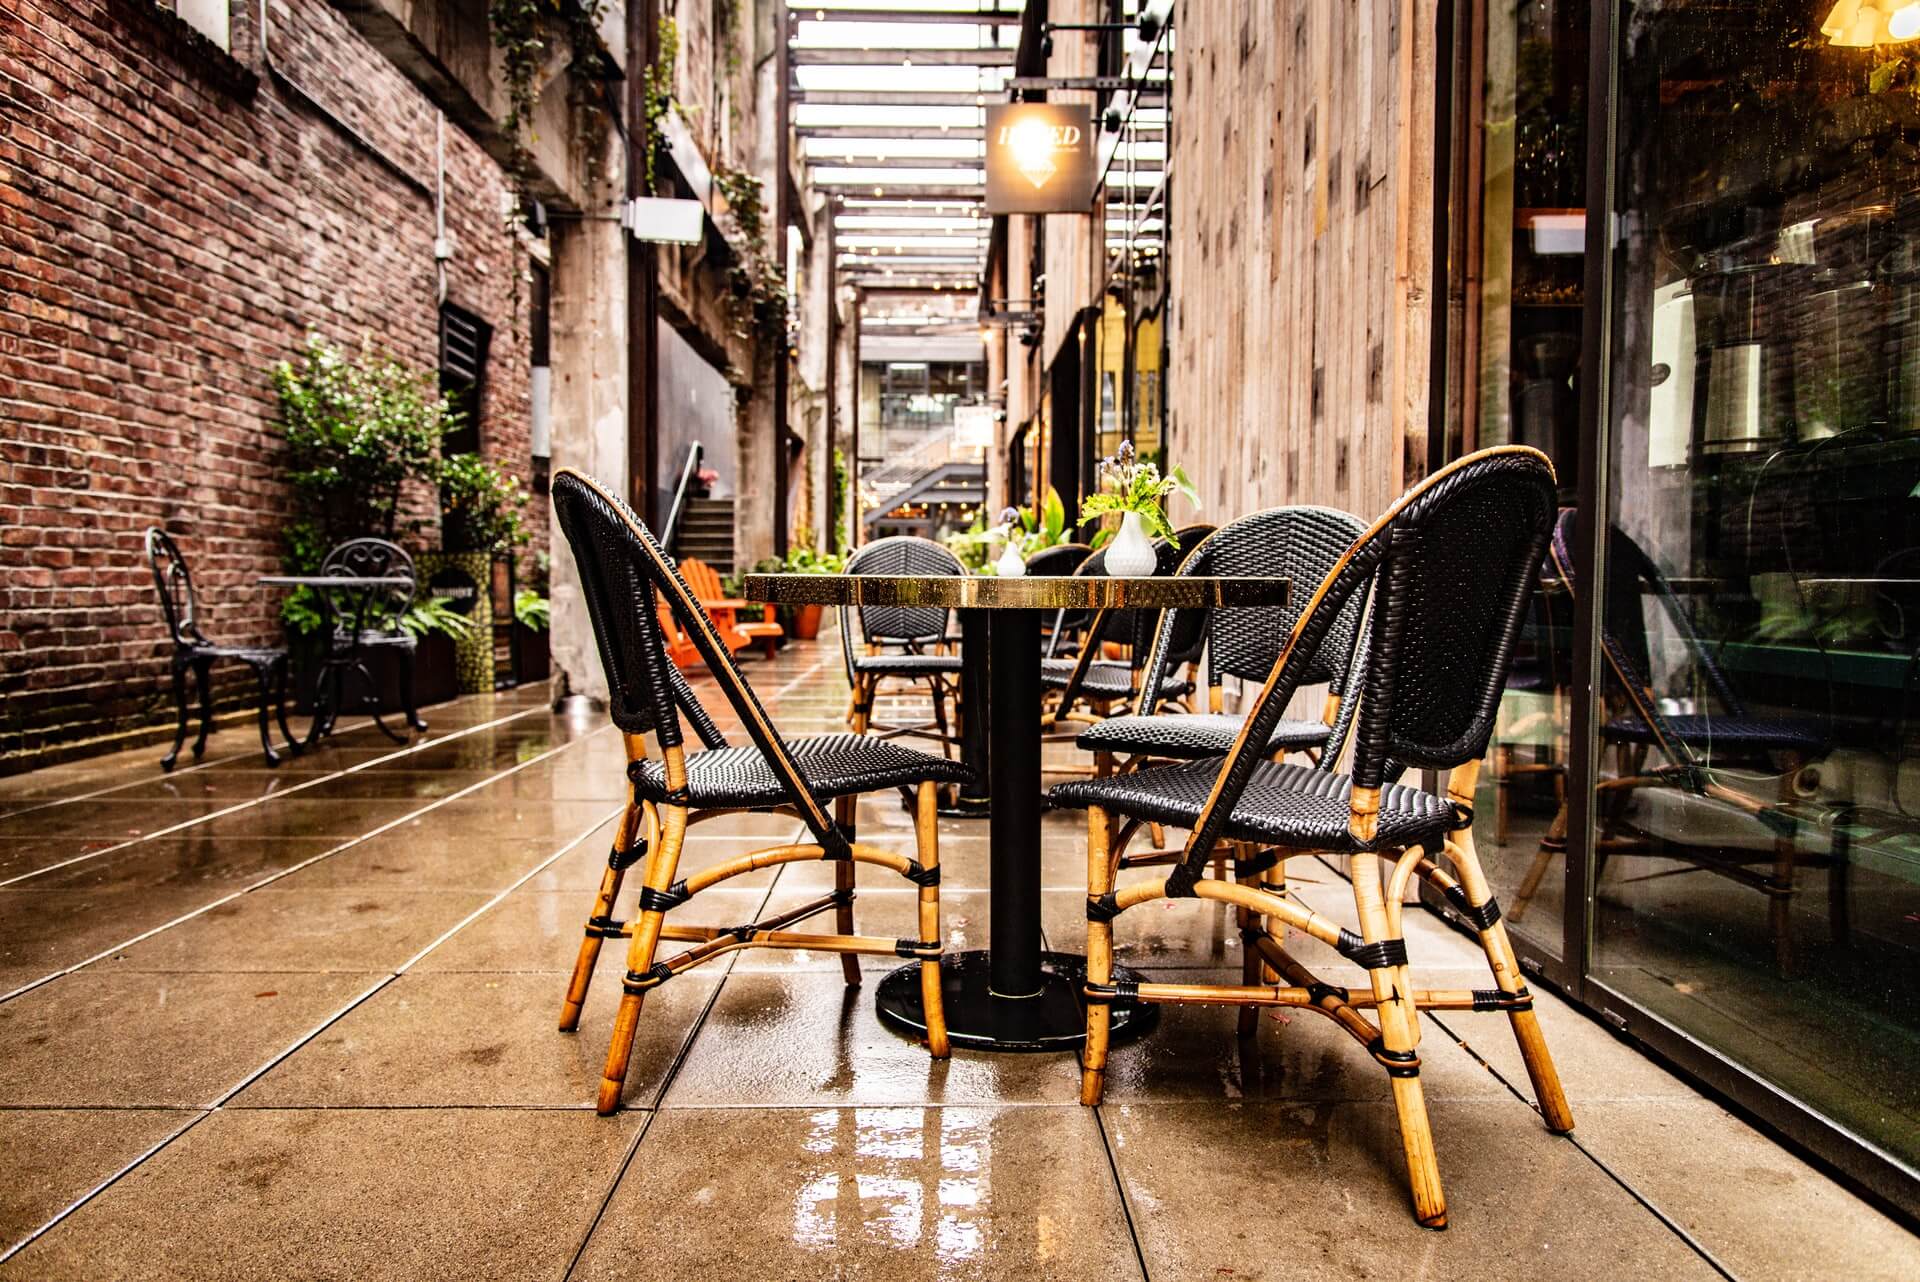 Outdoor seating on restaurant patio